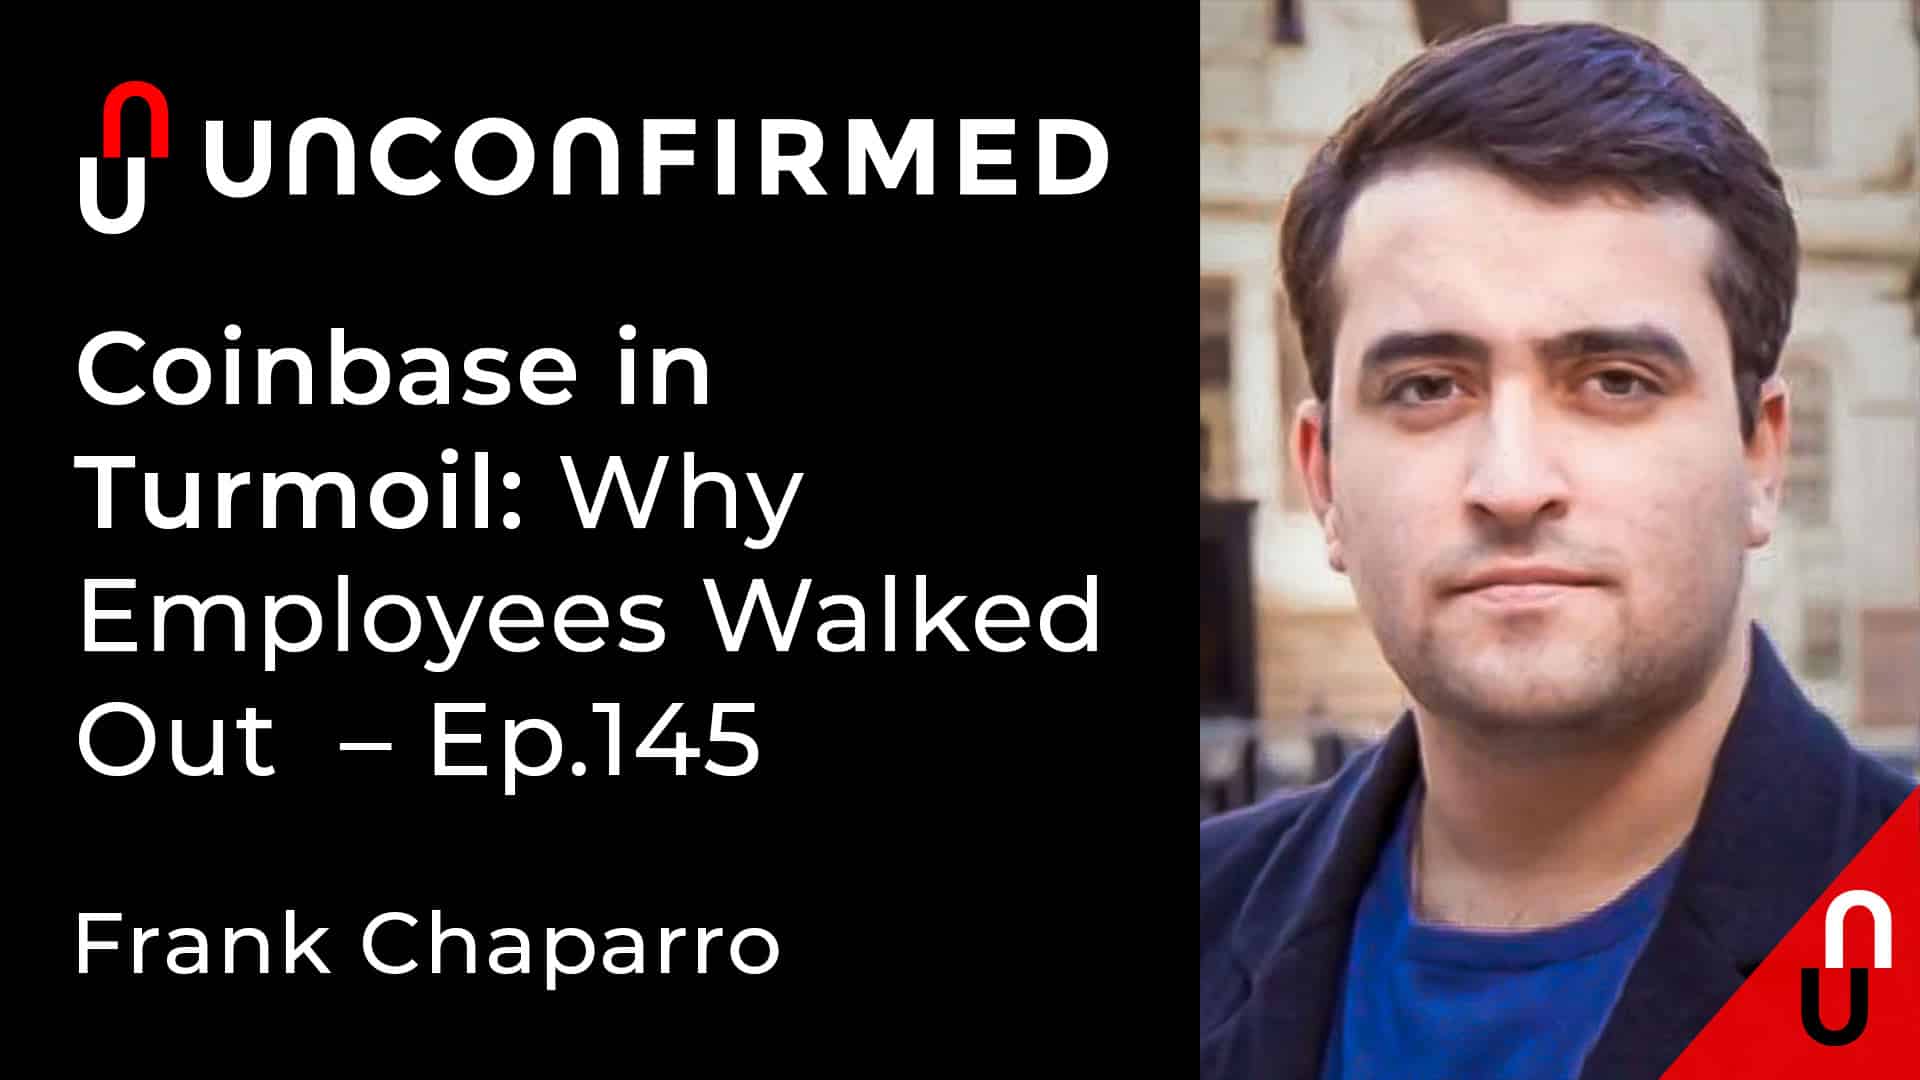 Unconfirmed - Ep.145 - Coinbase in Turmoil - Why Employees Walked Out